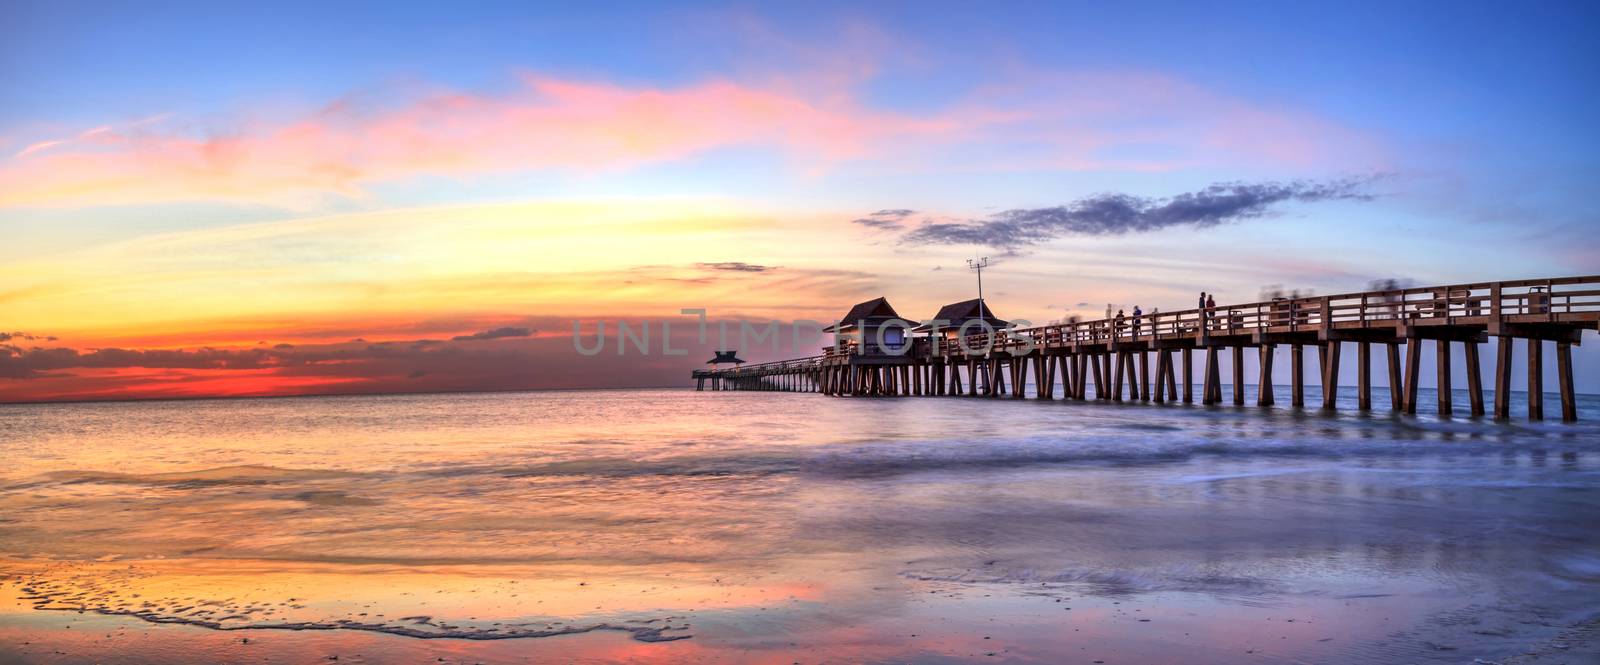 Naples Pier on the beach at sunset by steffstarr